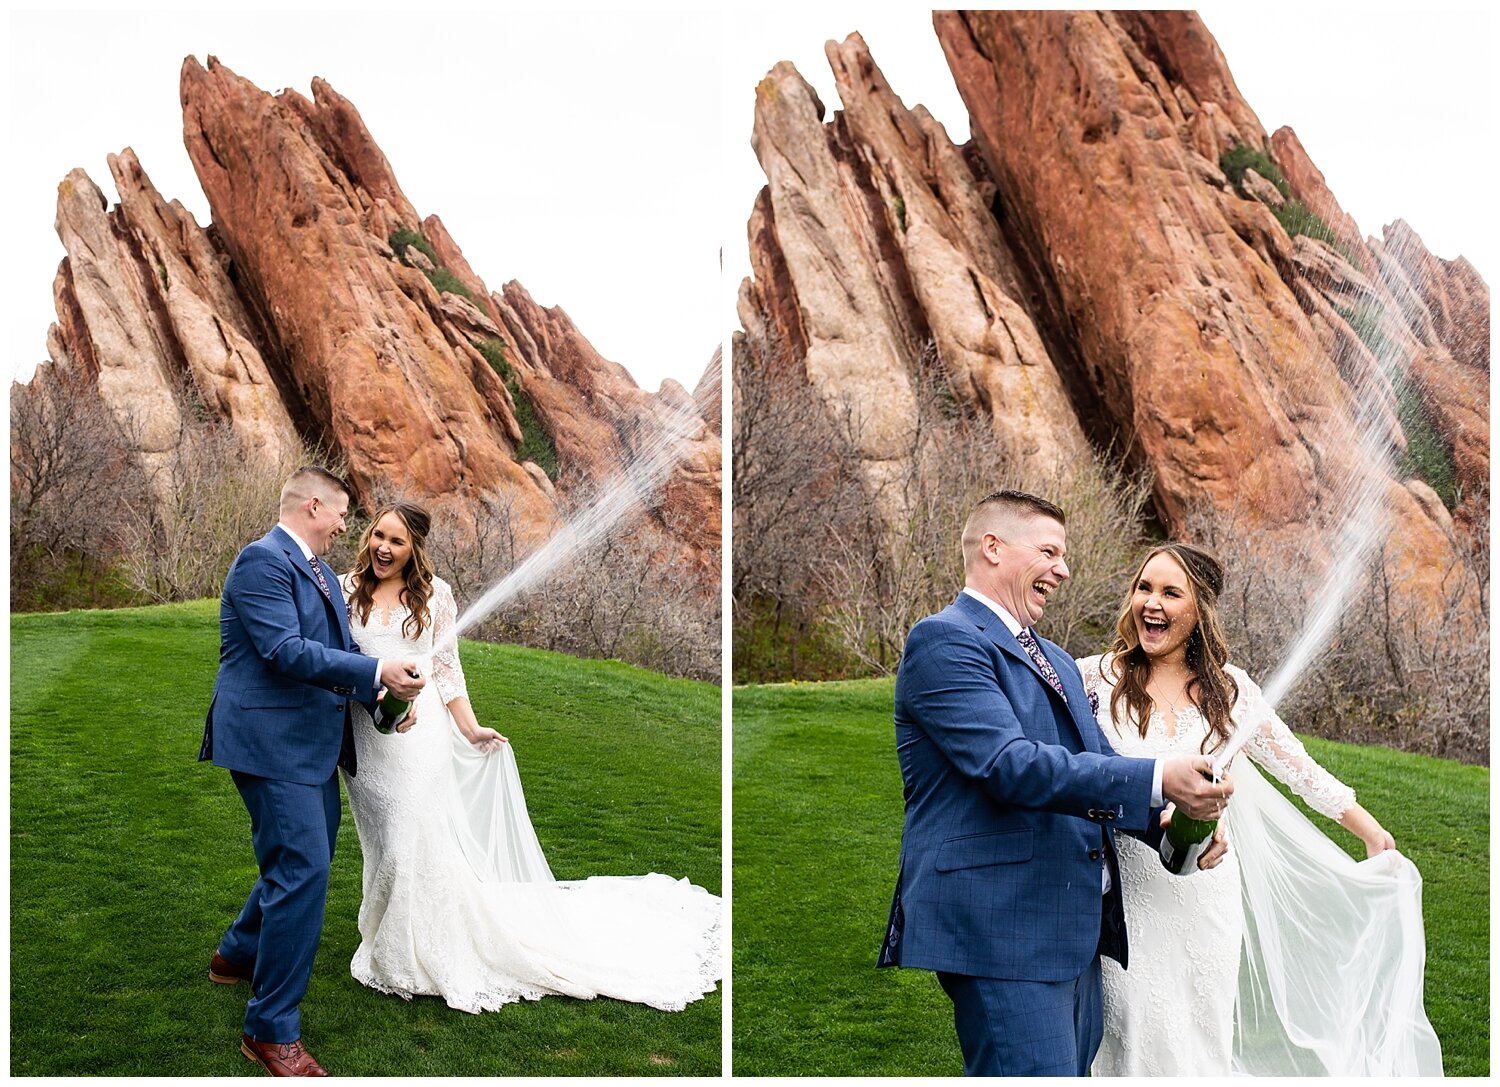 Molly and Nick's Wedding Day|Arrowhead Golf Course Elopement_0078.jpg